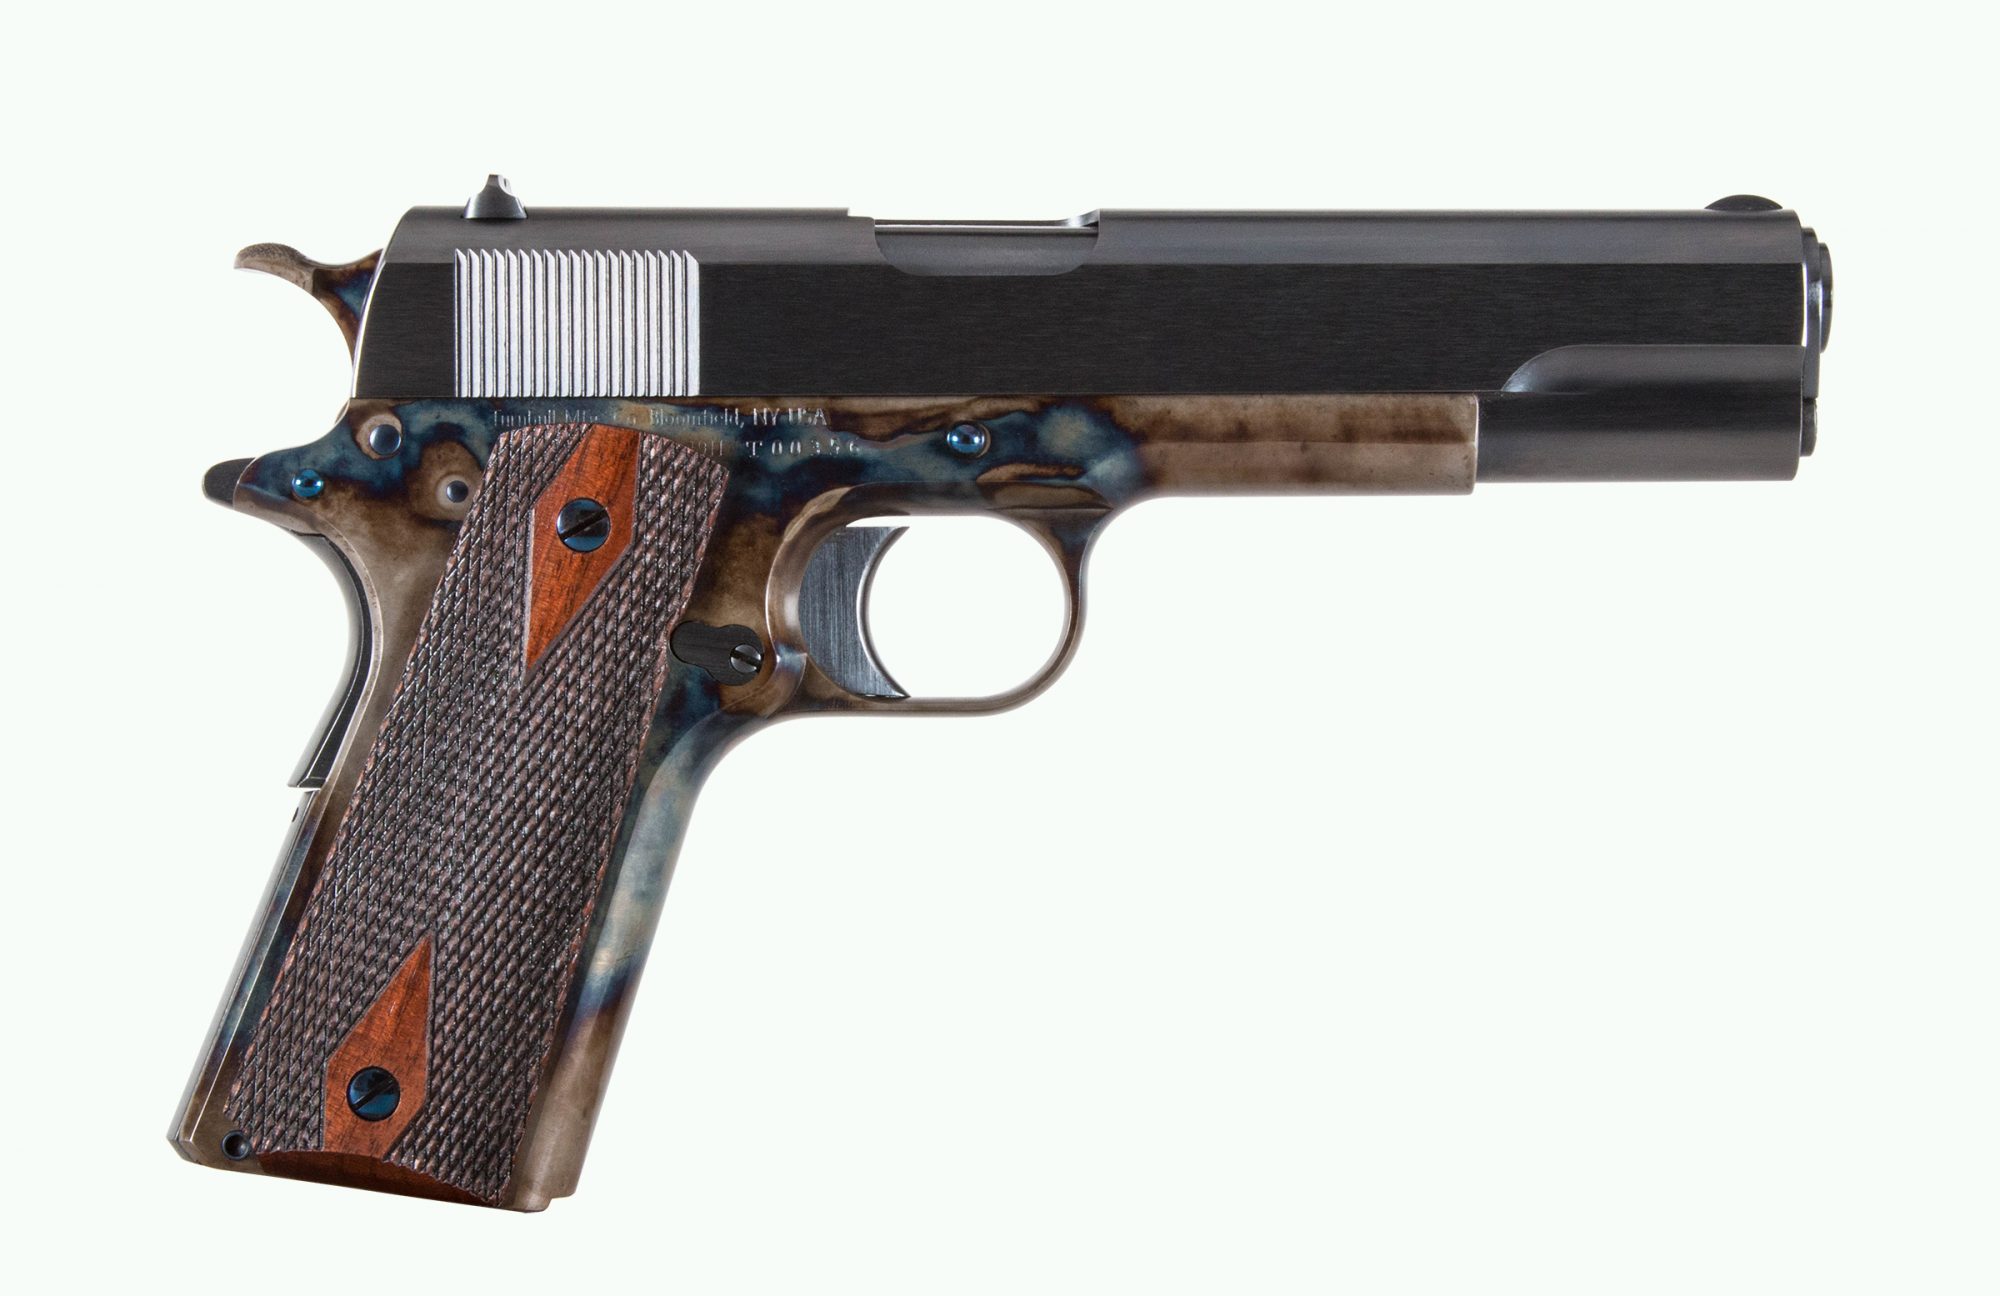 Turnbull Government Heritage Model 1911 WWI